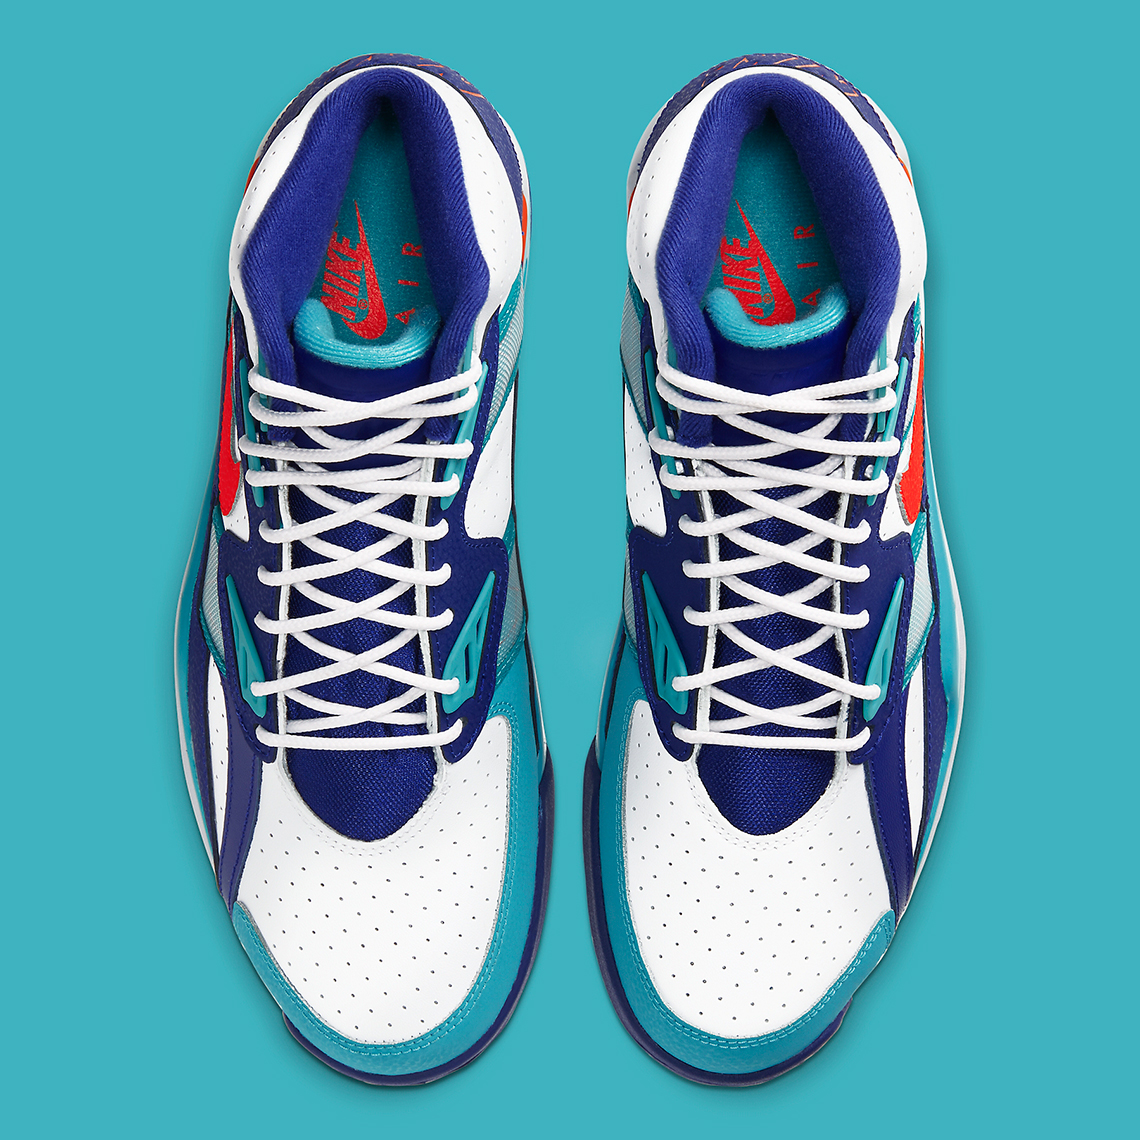 nike air trainer sc miami dolphins release date